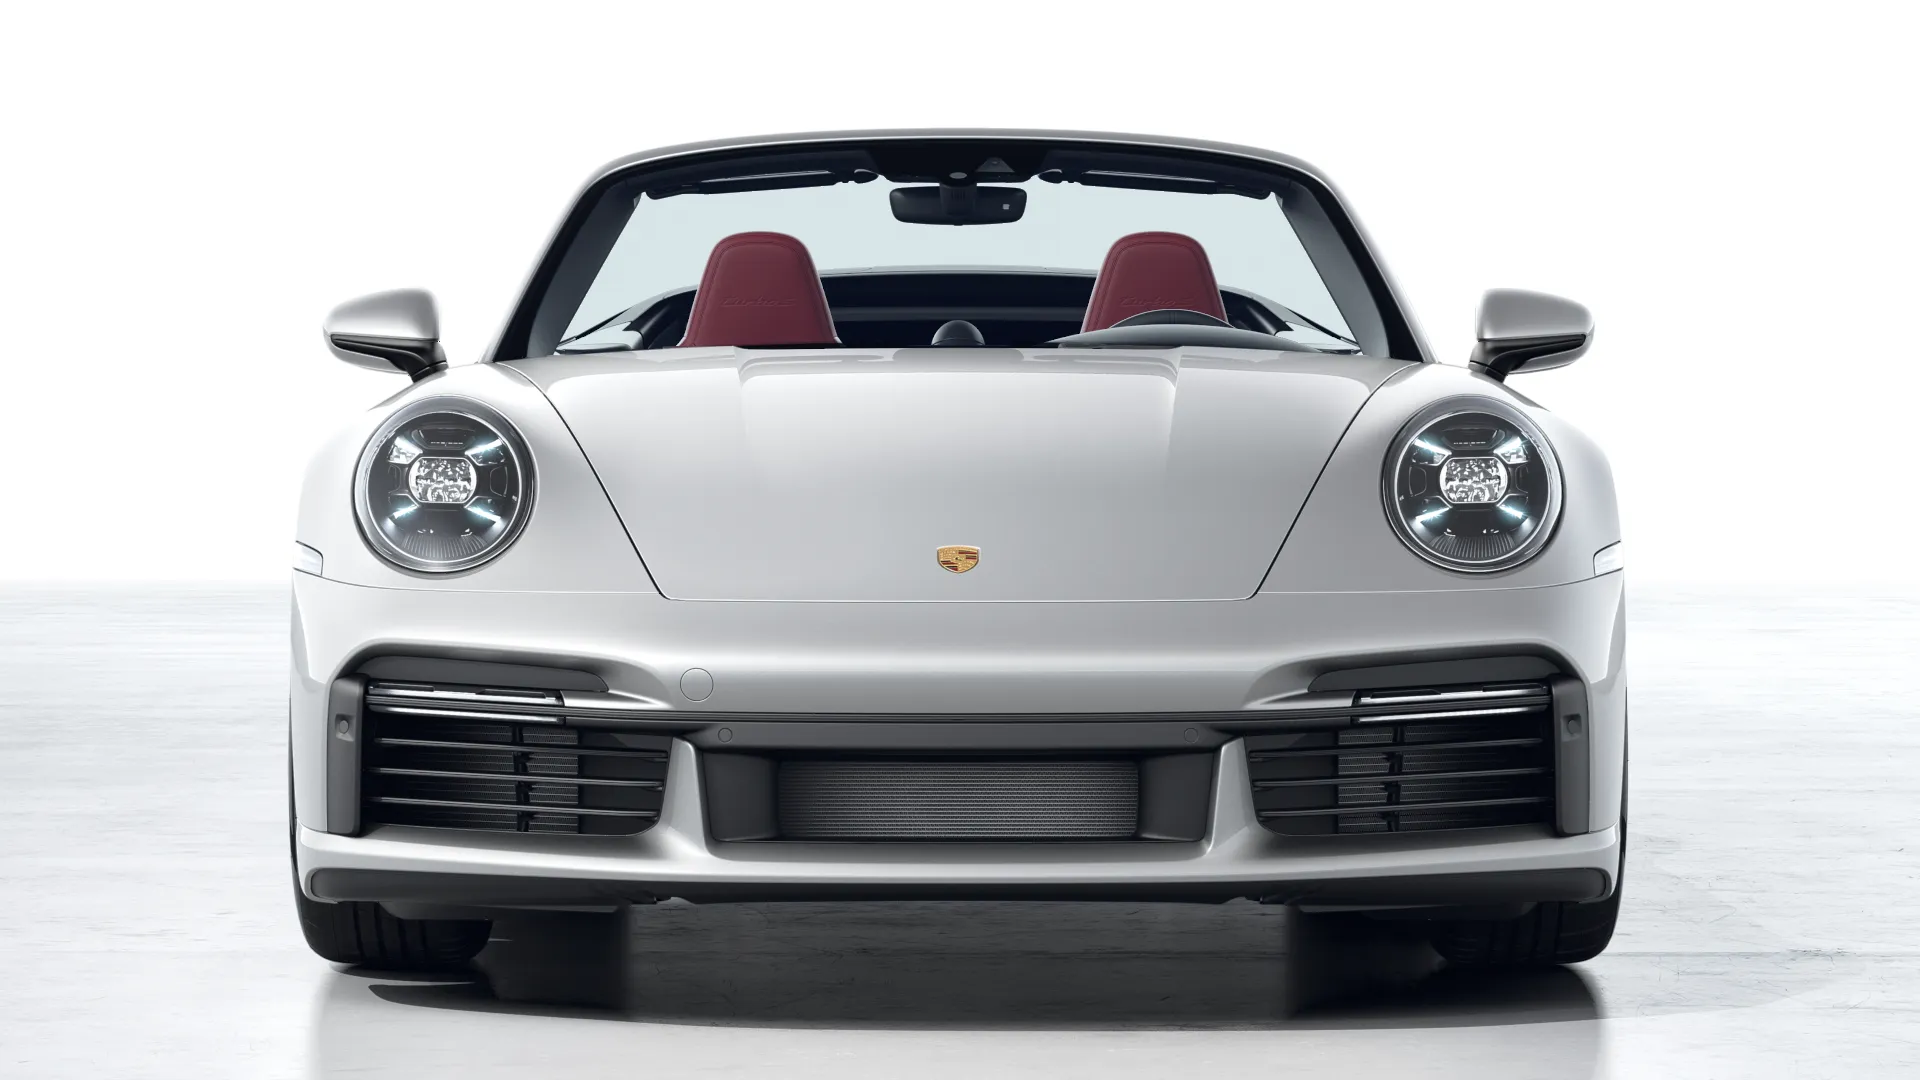 Exterior view of 911 Turbo S Cabriolet